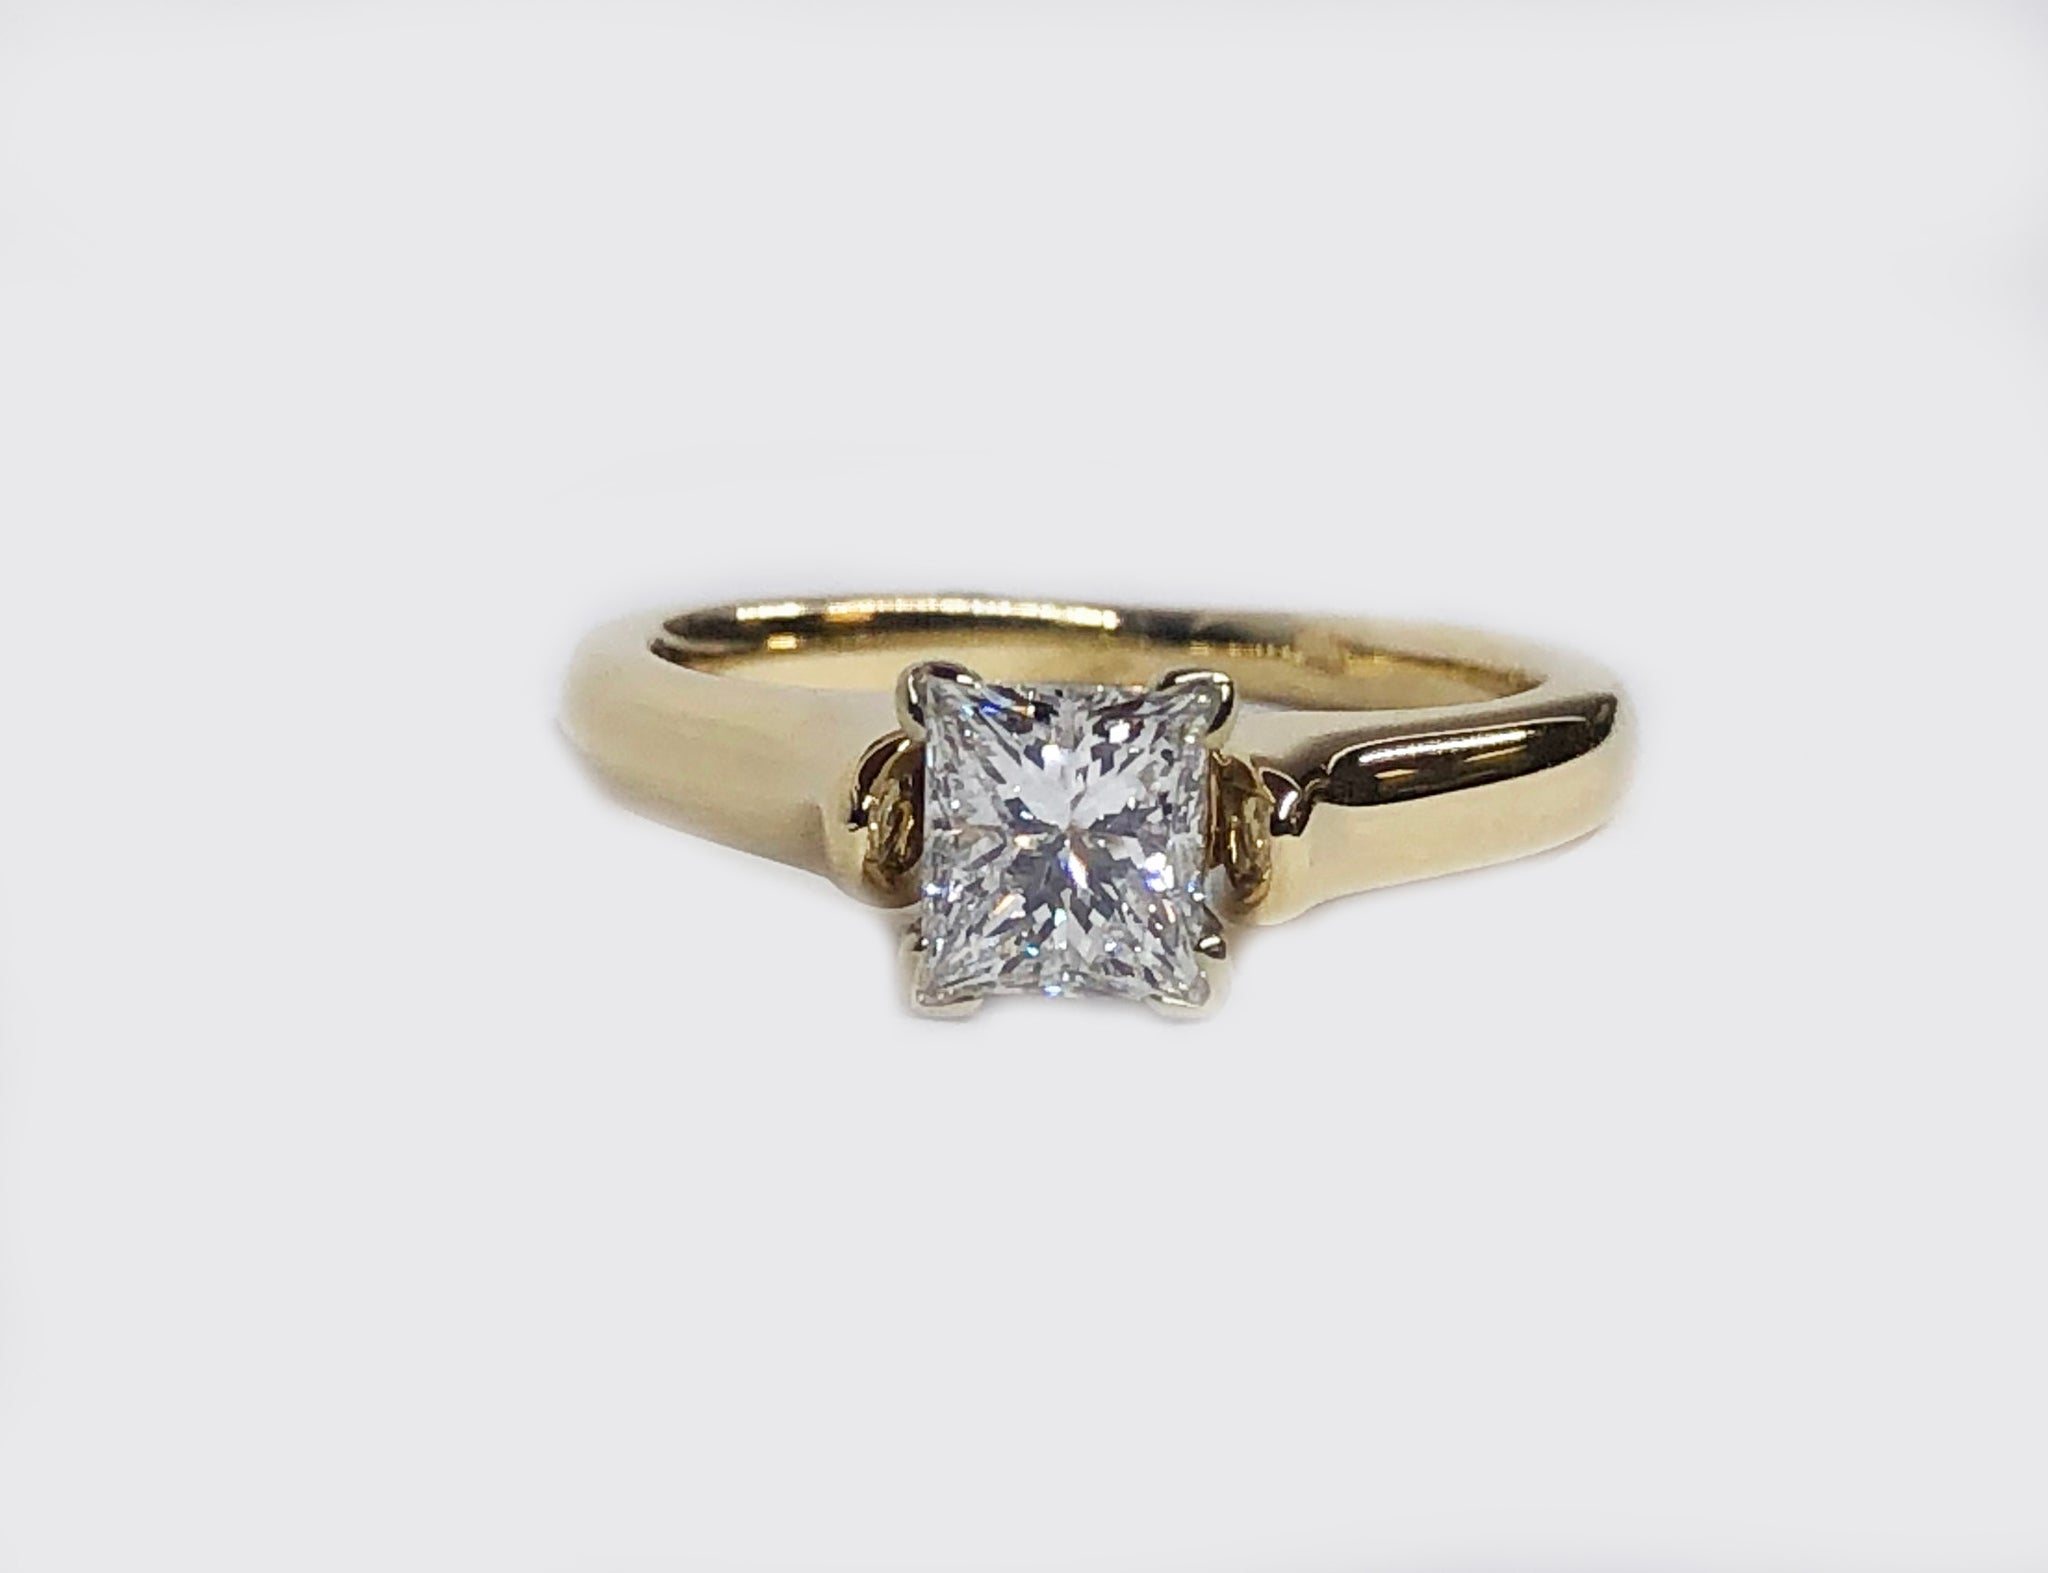 Perfect Antique Affordable Engagement Ring 0.50 Carat Princess Cut Diamond  on Gold - JeenJewels